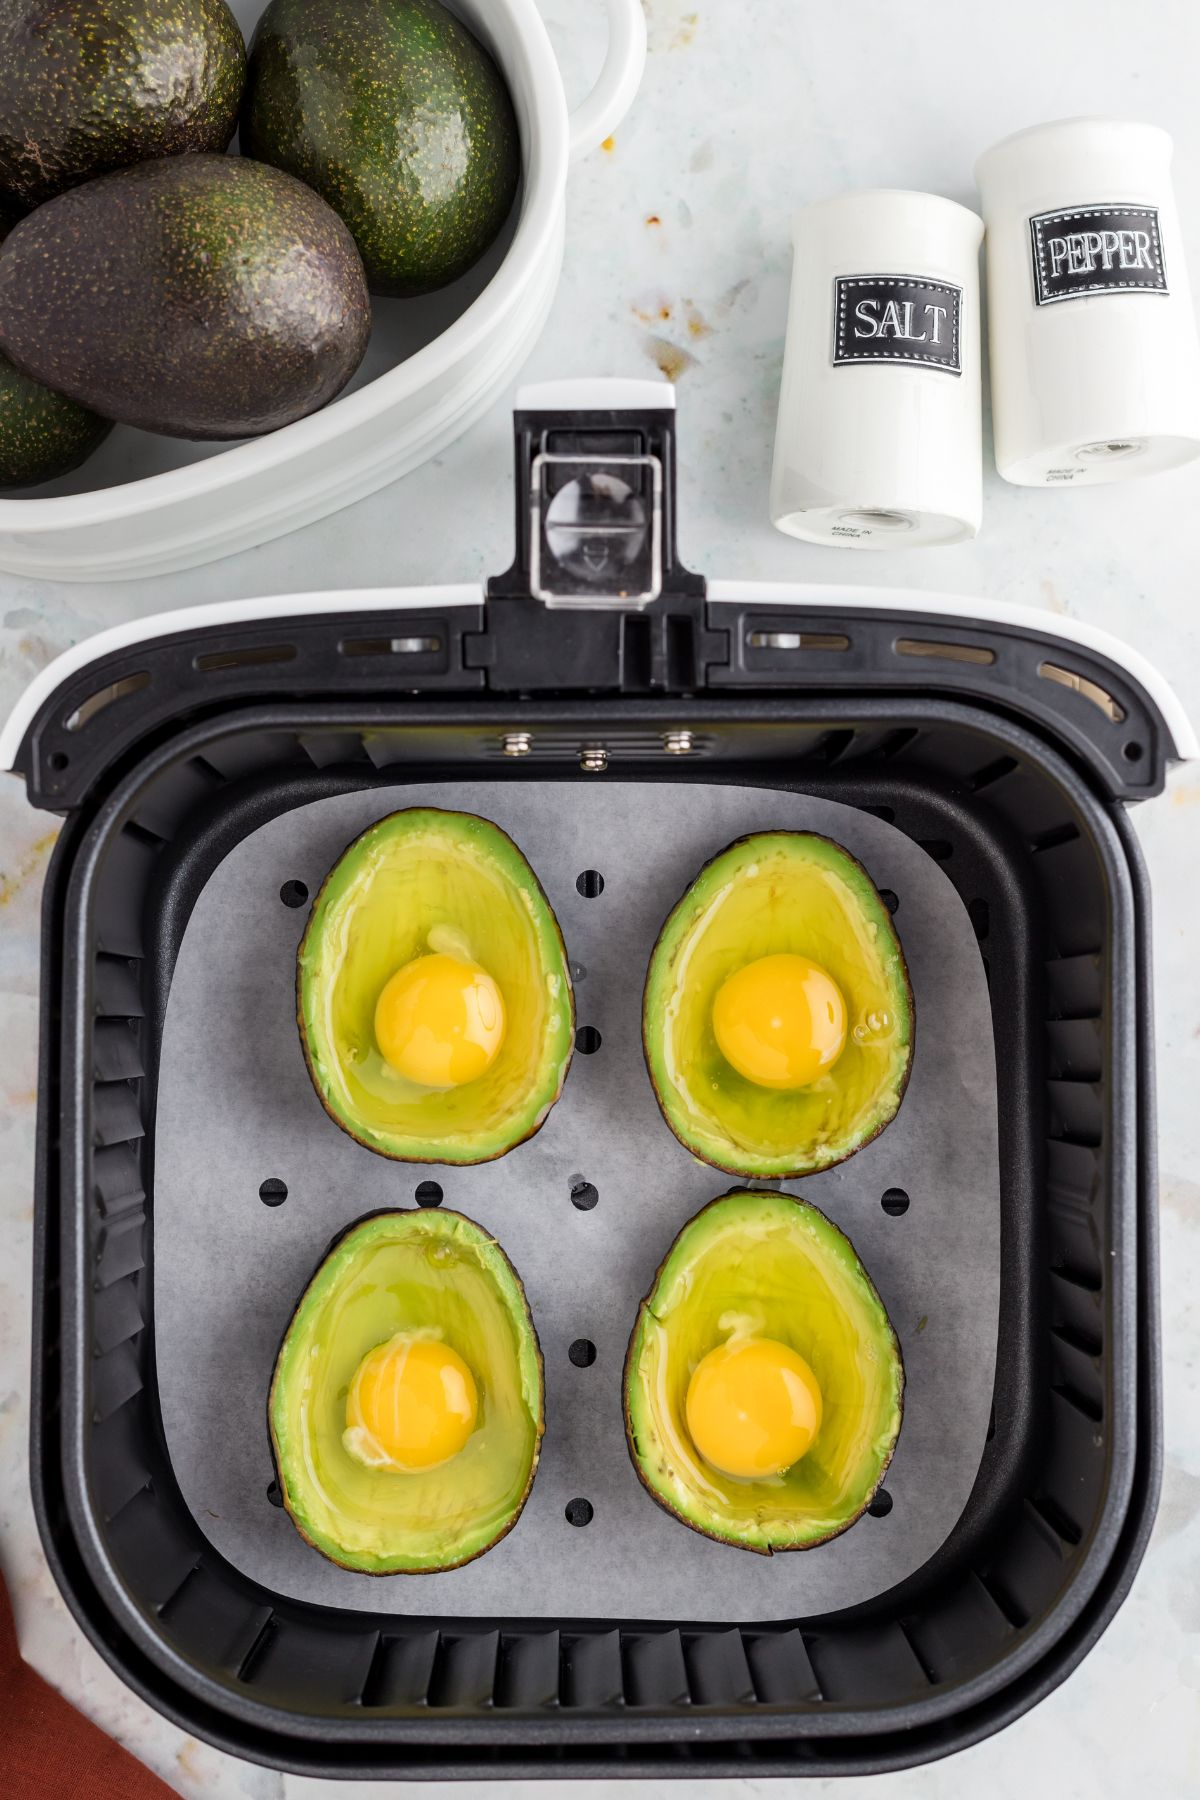 Avocados sliced in half and then filled with raw eggs in the air fryer basket.